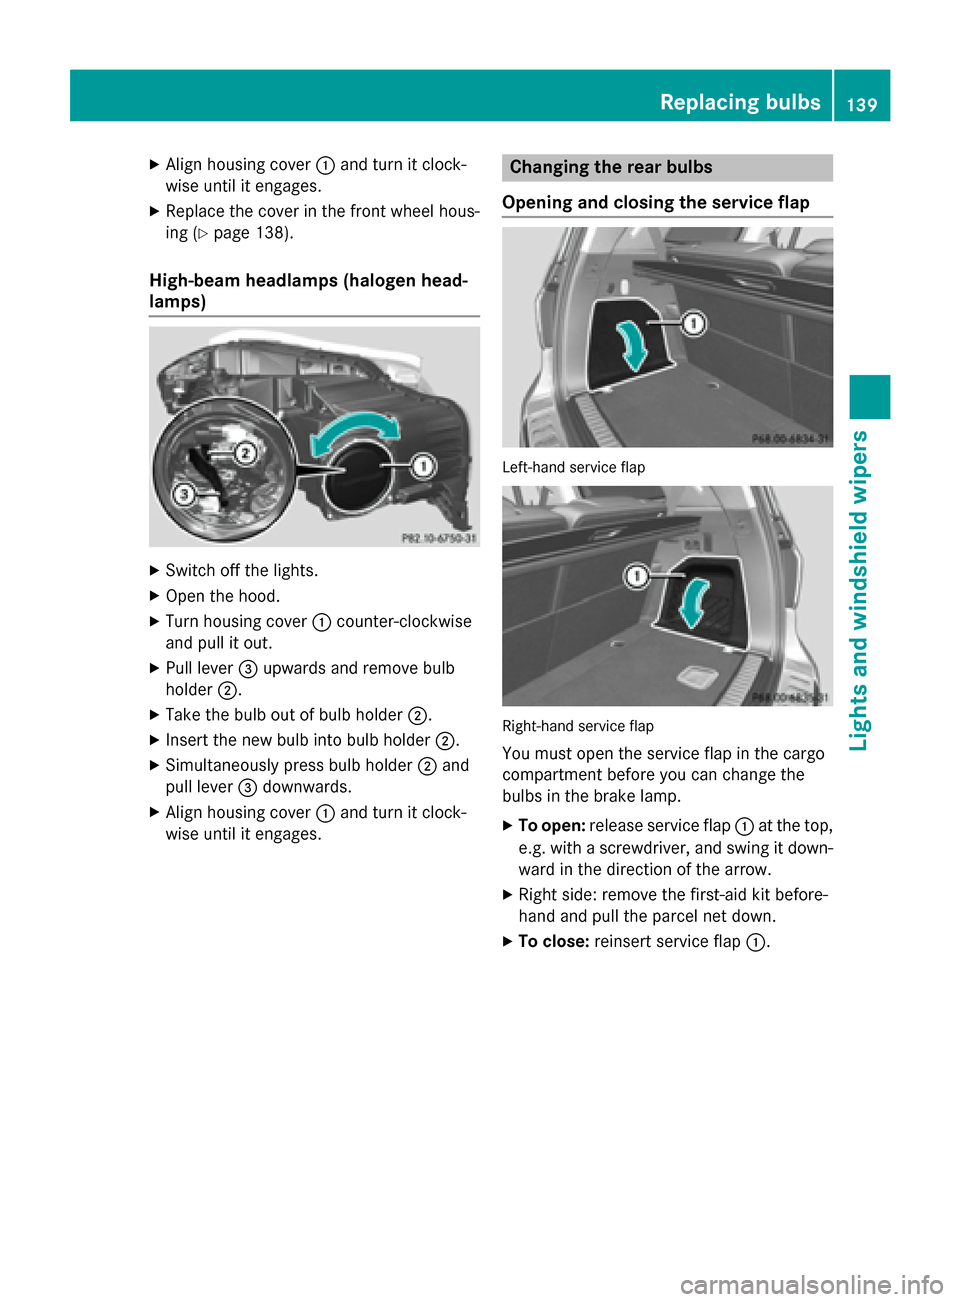 MERCEDES-BENZ GL-Class 2015 X166 Owners Manual X
Align housing cover 0043and turn it clock-
wise until it engages.
X Replace the cover in the front wheel hous-
ing (Y page 138).
High-beam headlamps (halogen head-
lamps) X
Switch off the lights.
X 